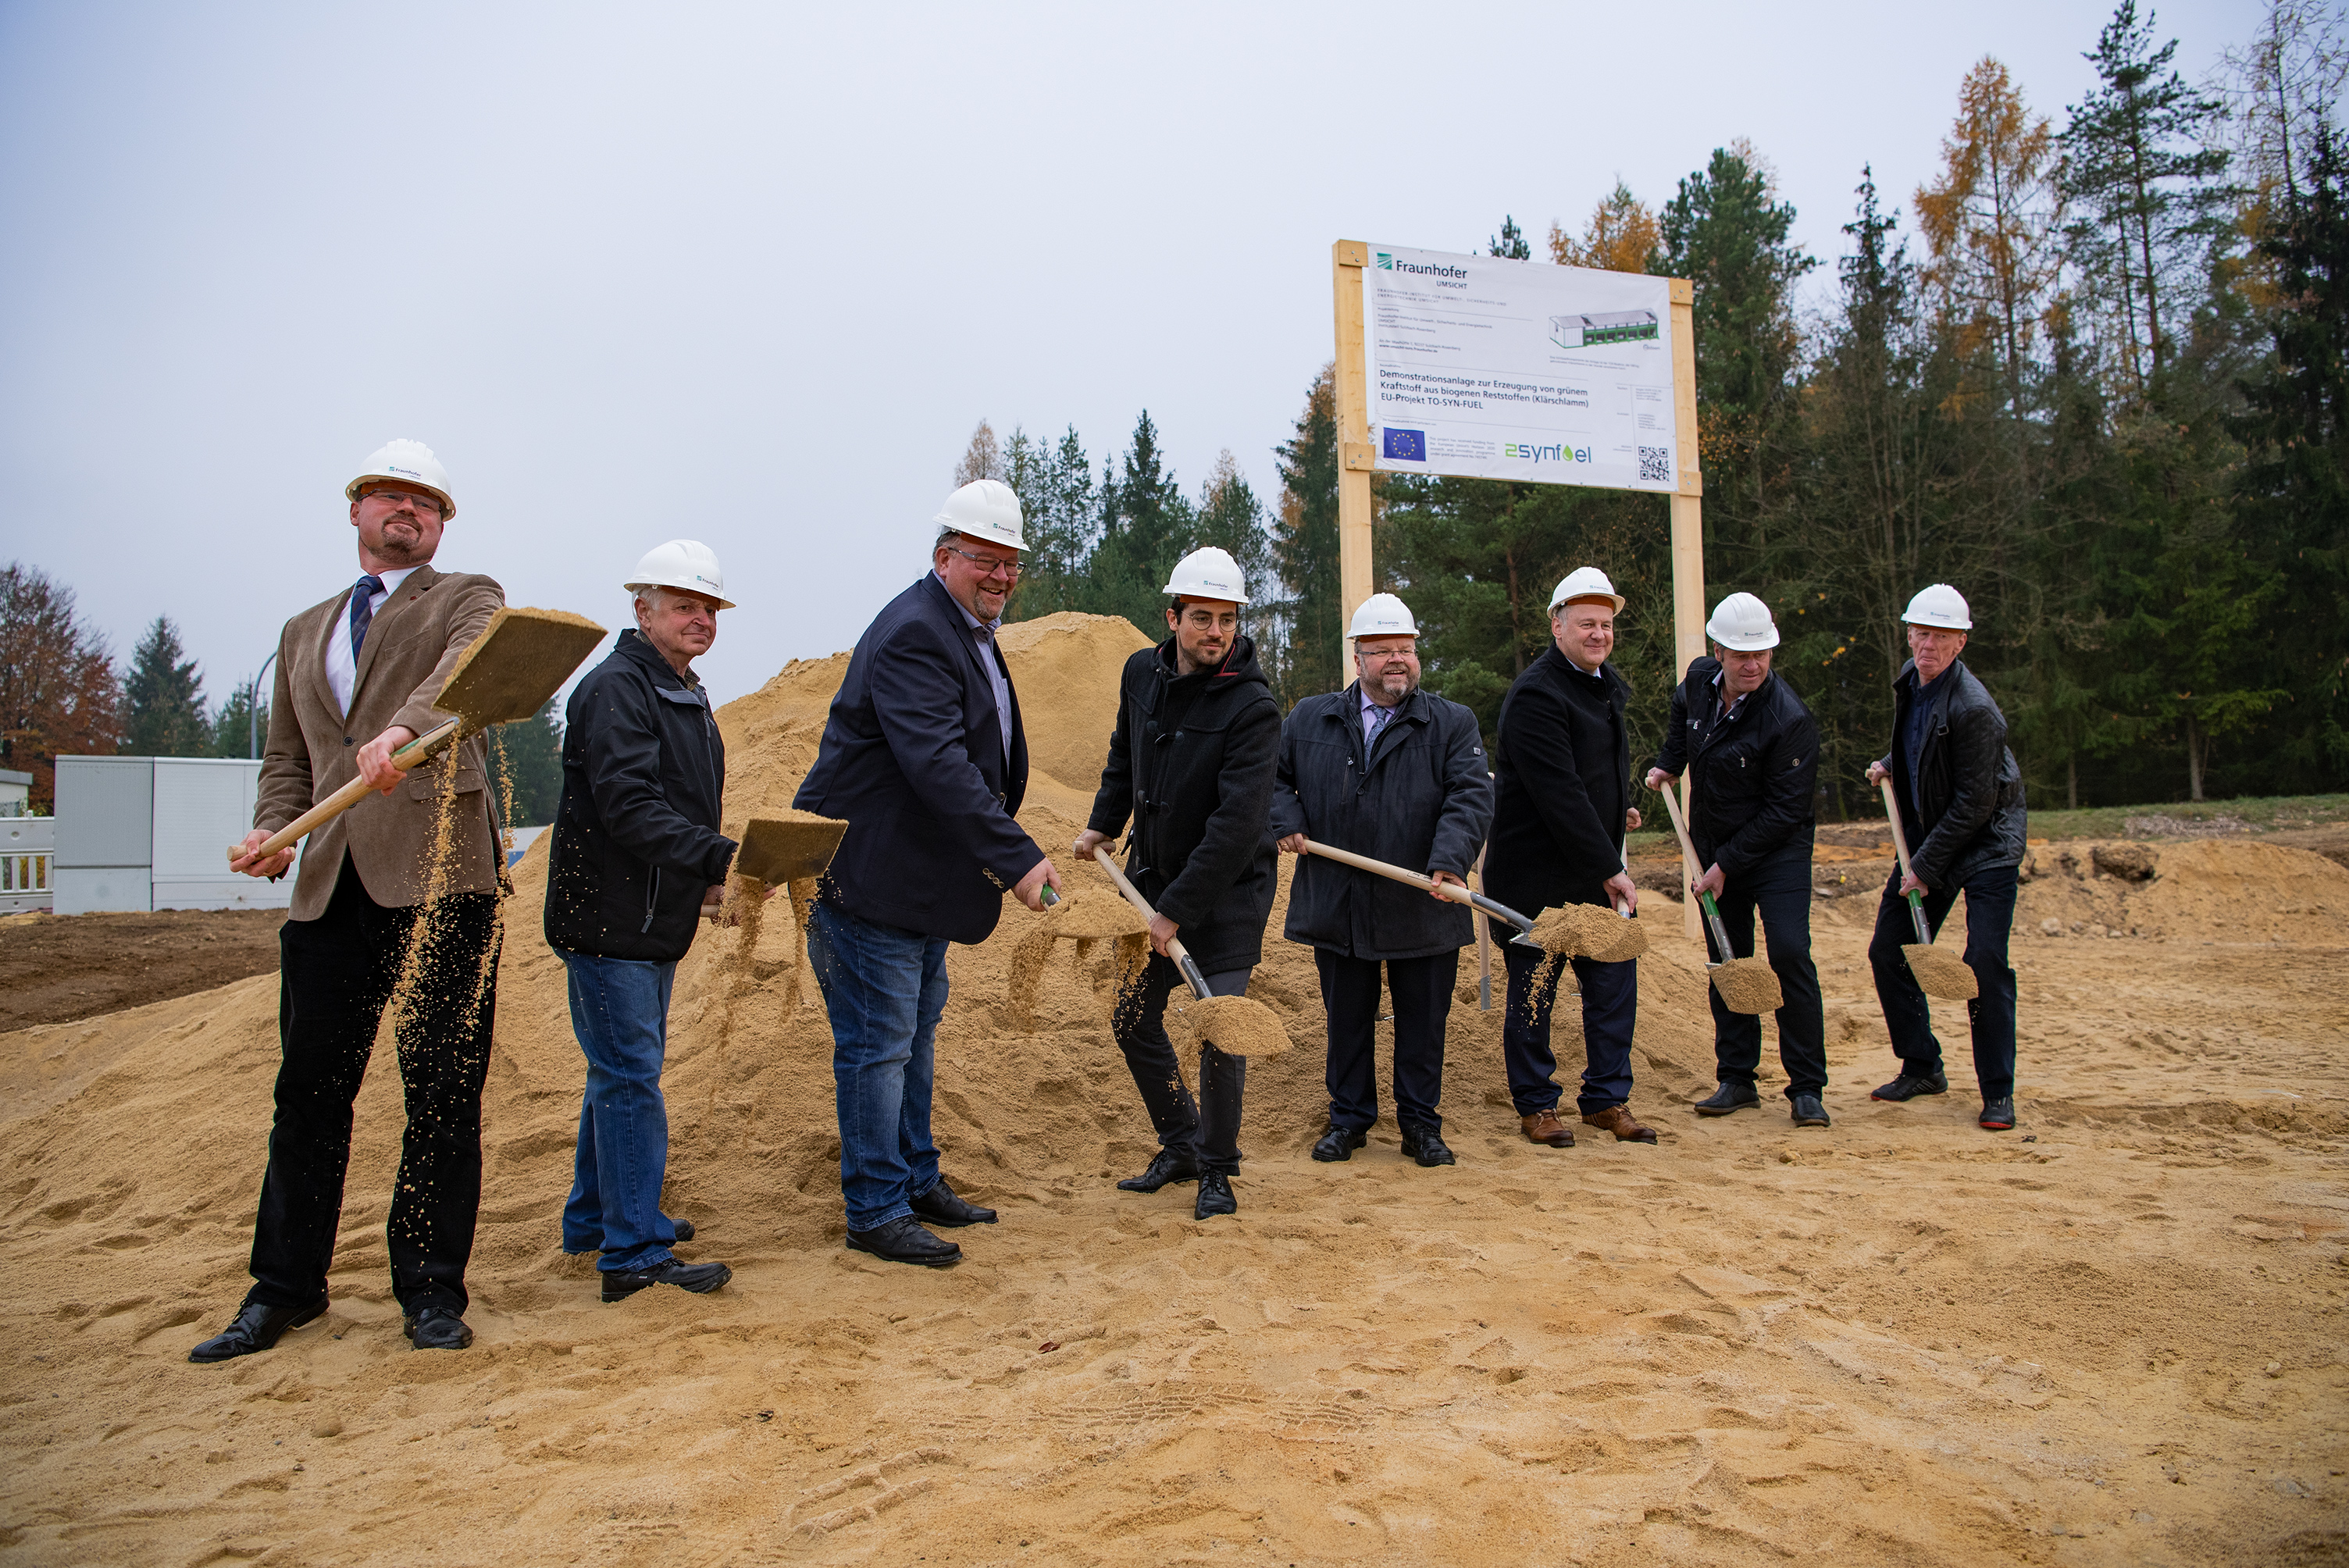 Ground-breaking ceremony in the Hohenburg Industrial Park. 